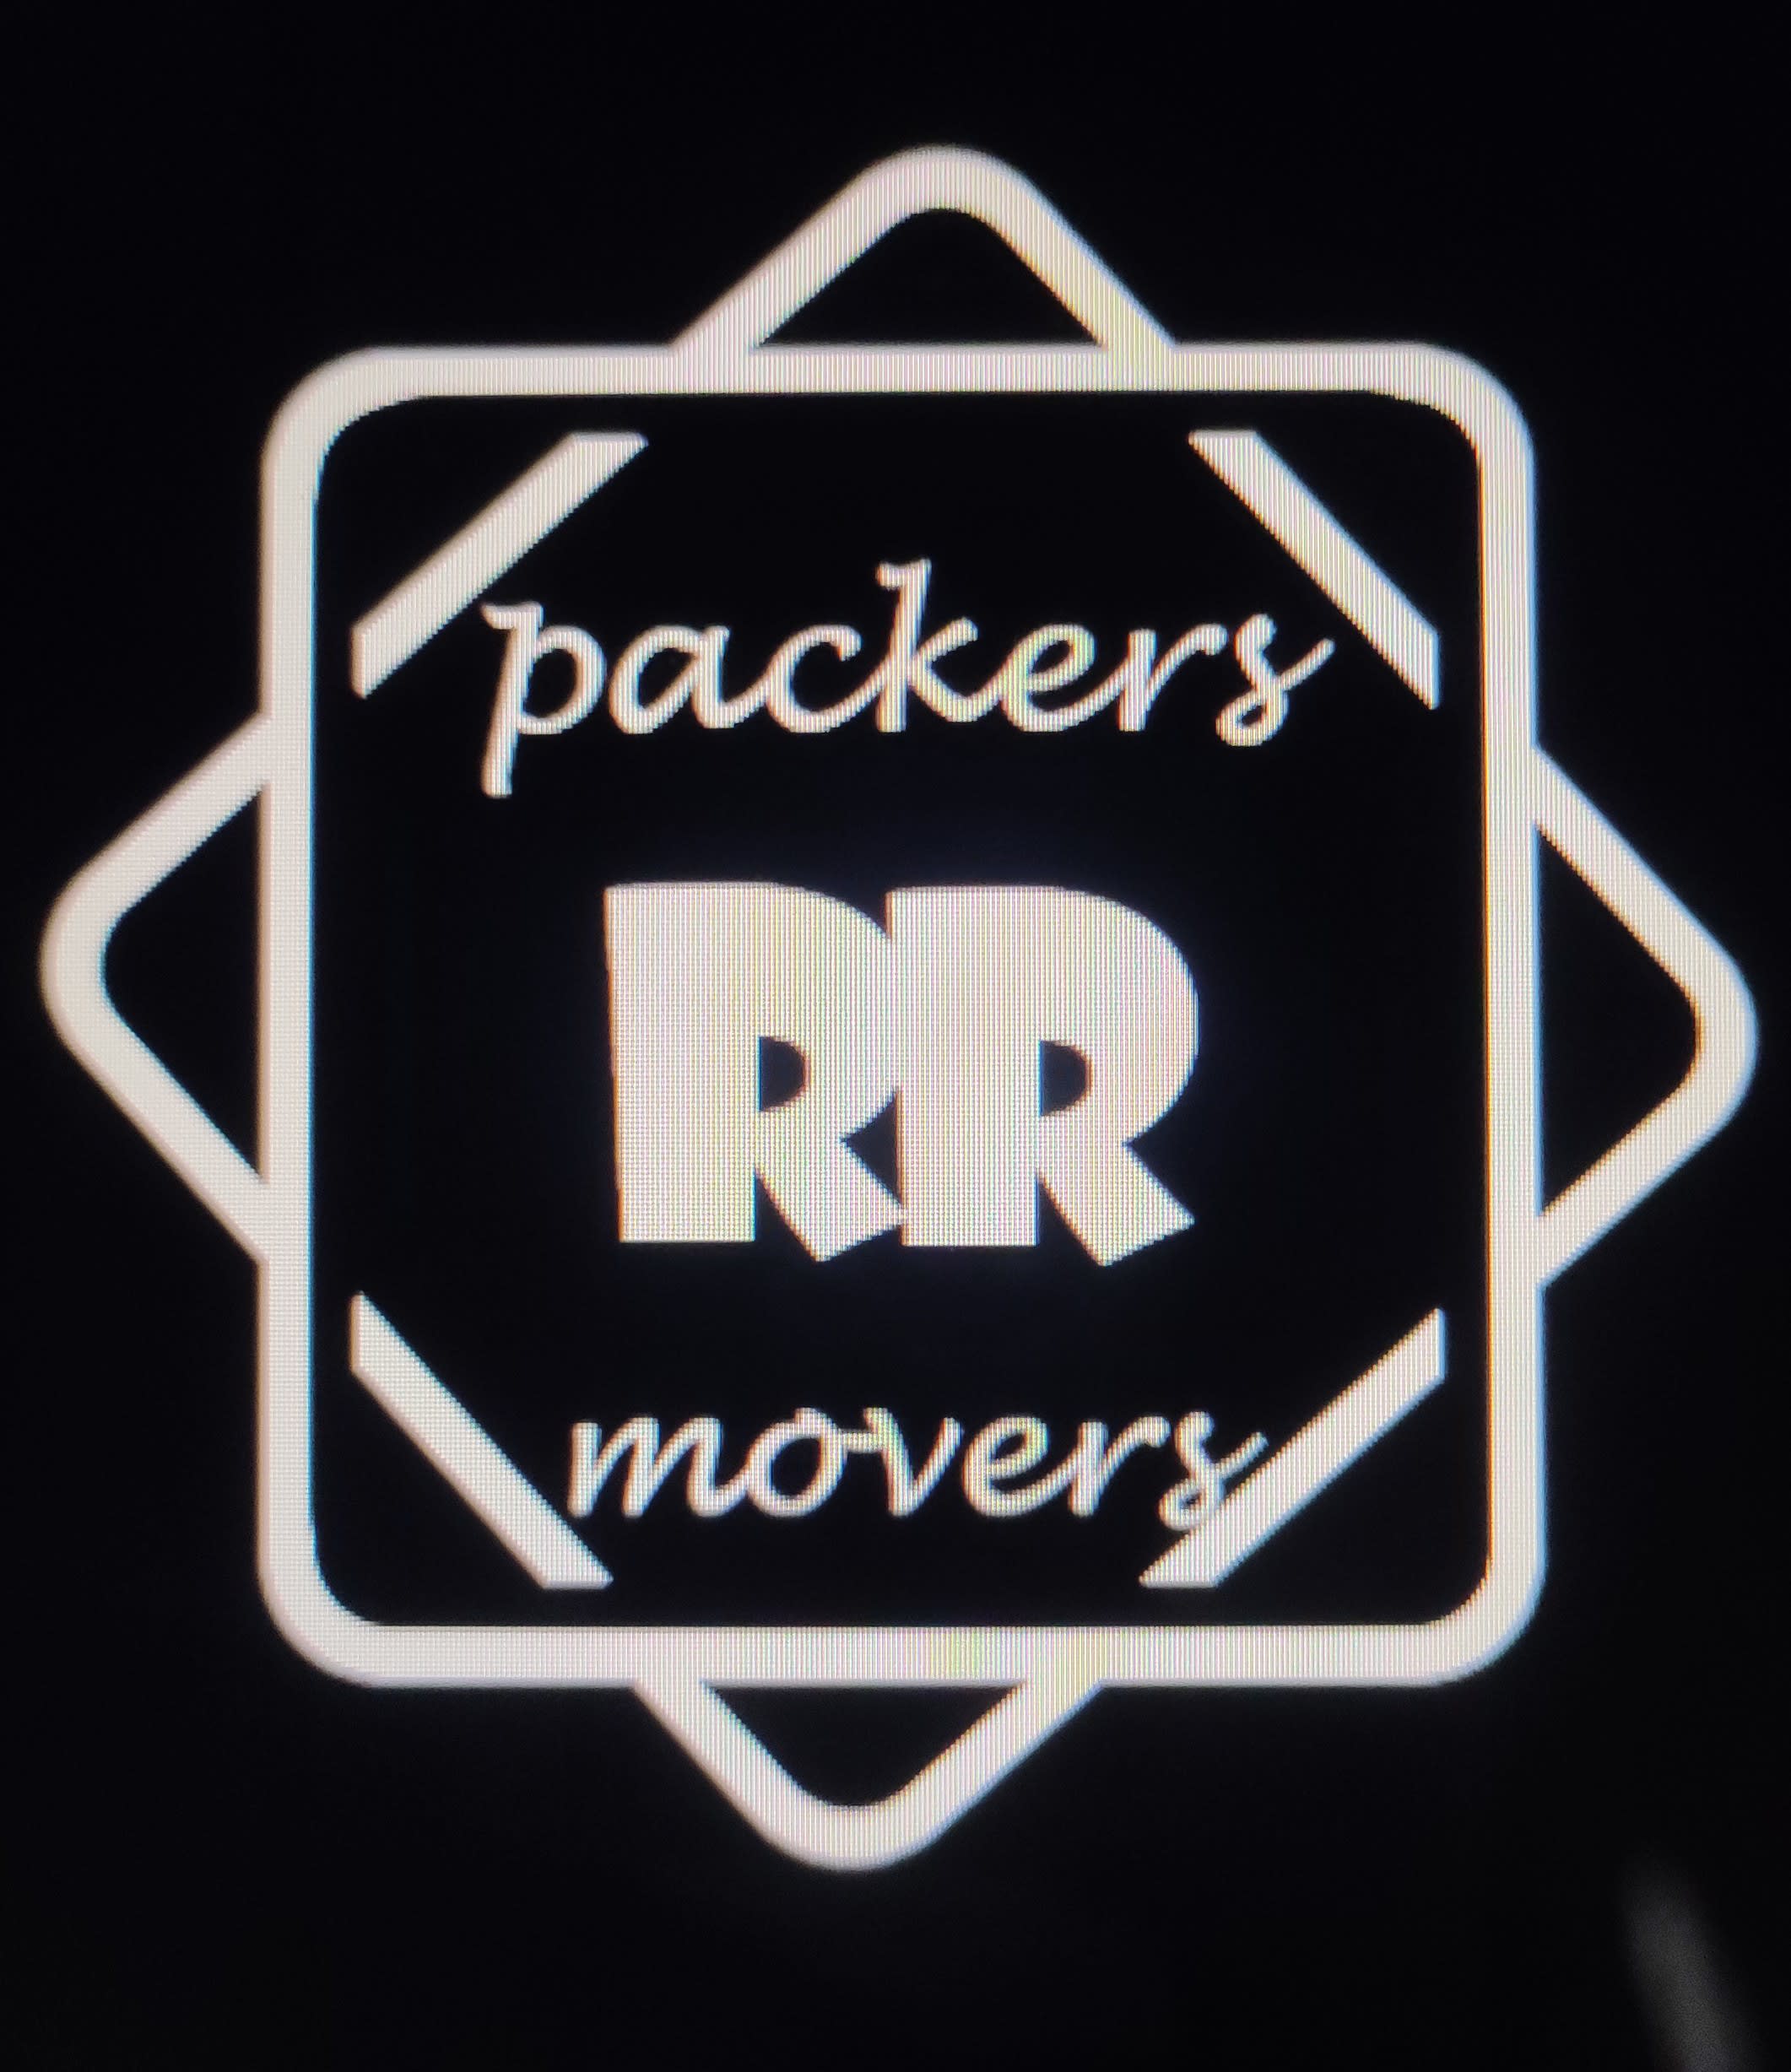 Royal Roadways Packer & Movers